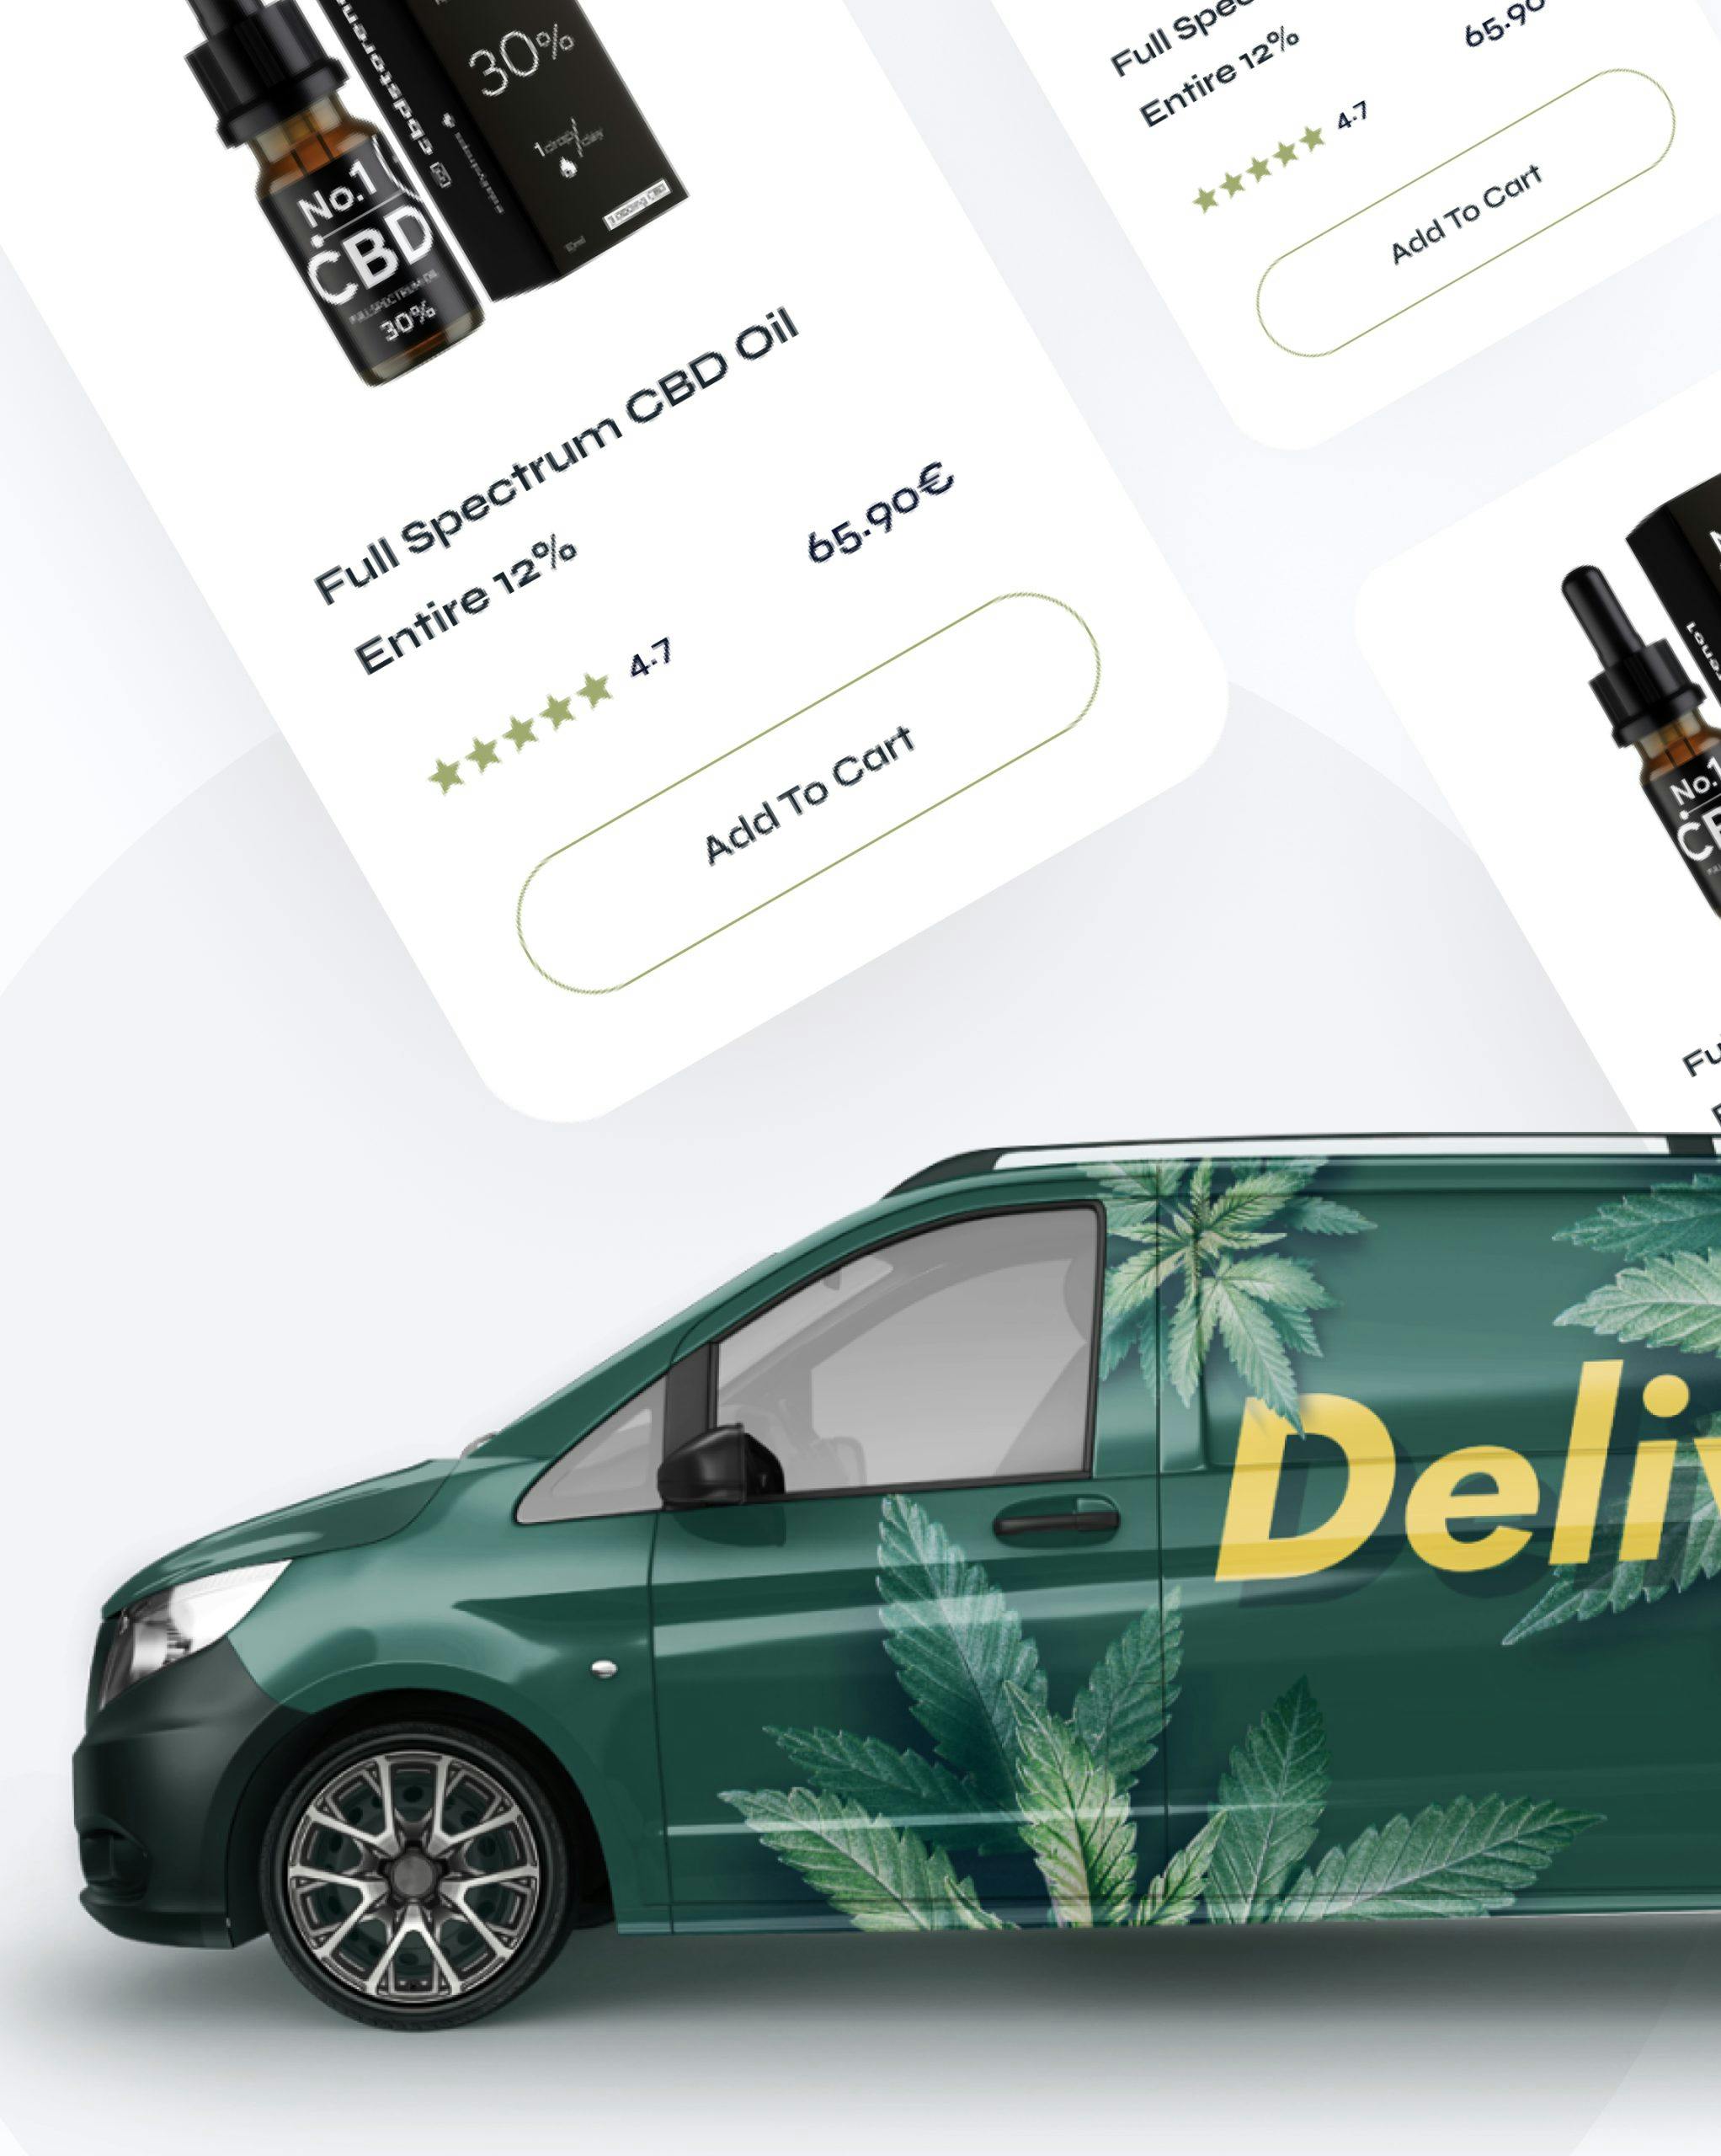 CBD delivery offers a secure and convenient way to shop, minimizing hassles, and allowing for easy transactions.